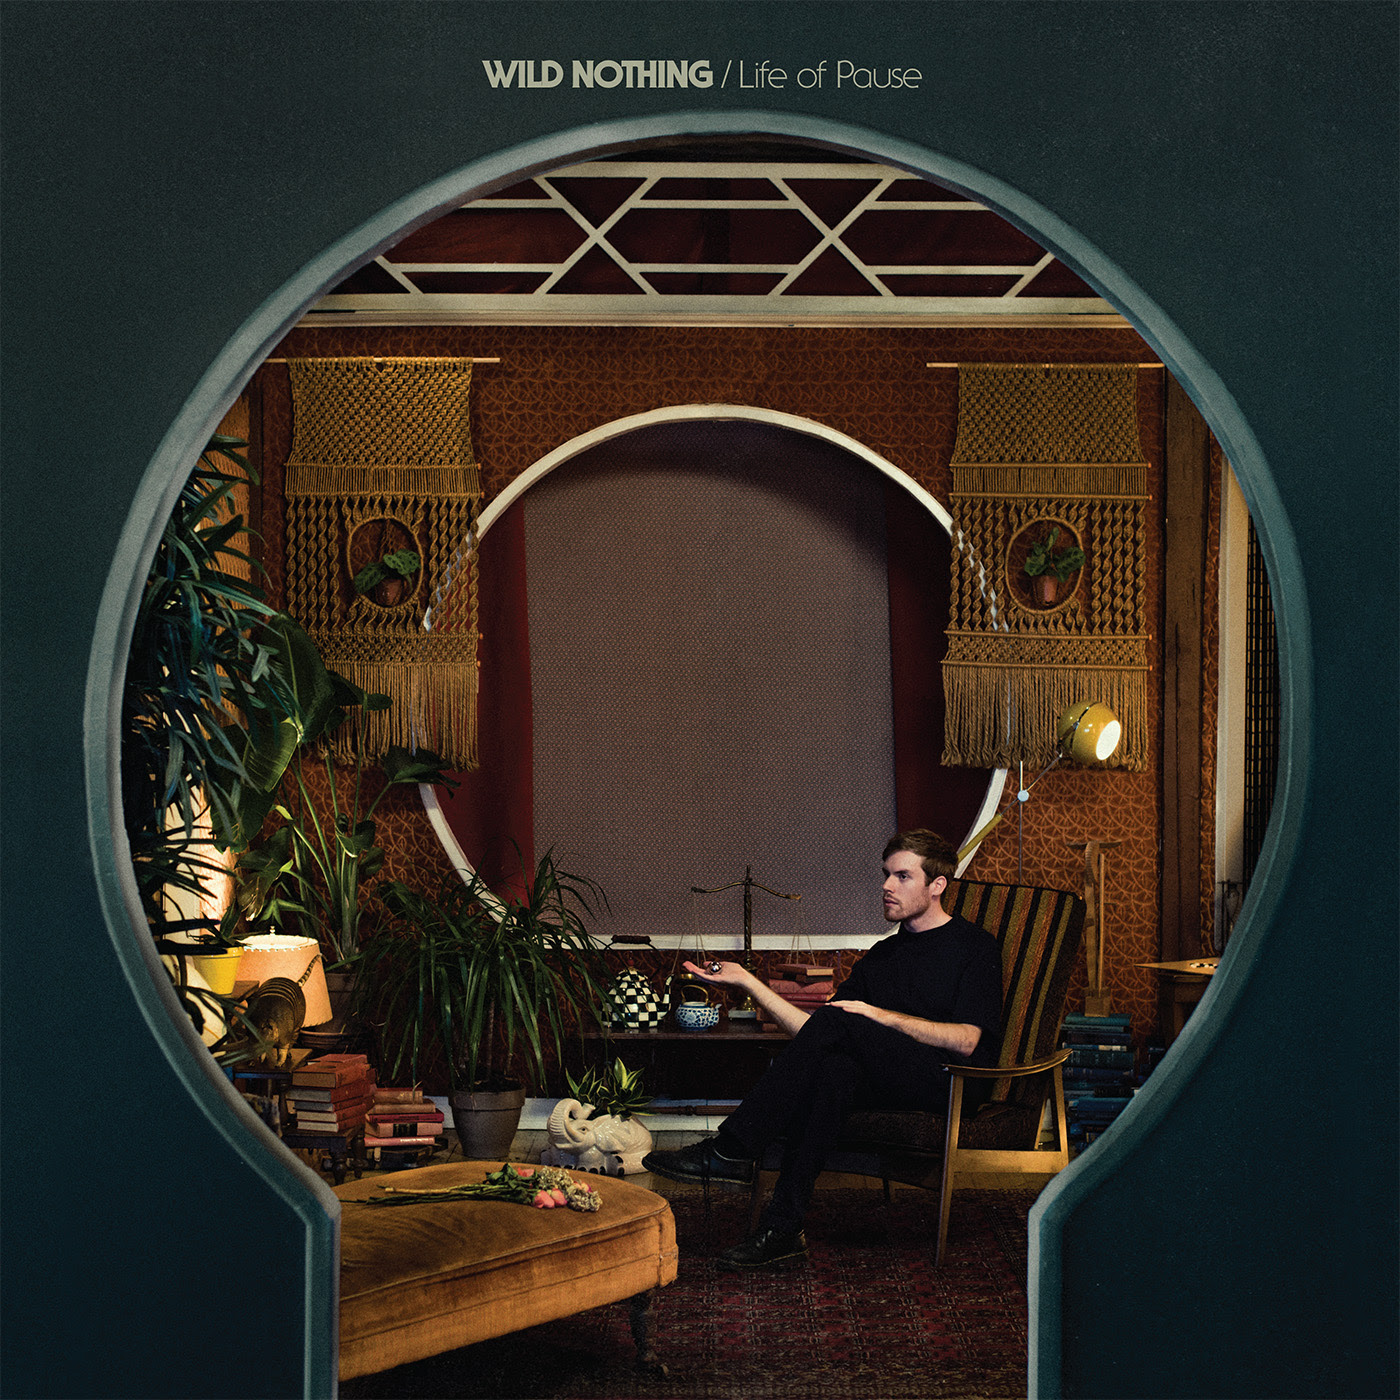 WILD NOTHING shares new single "Reichpop", taken from new album "Life Of Pause", released February 19th